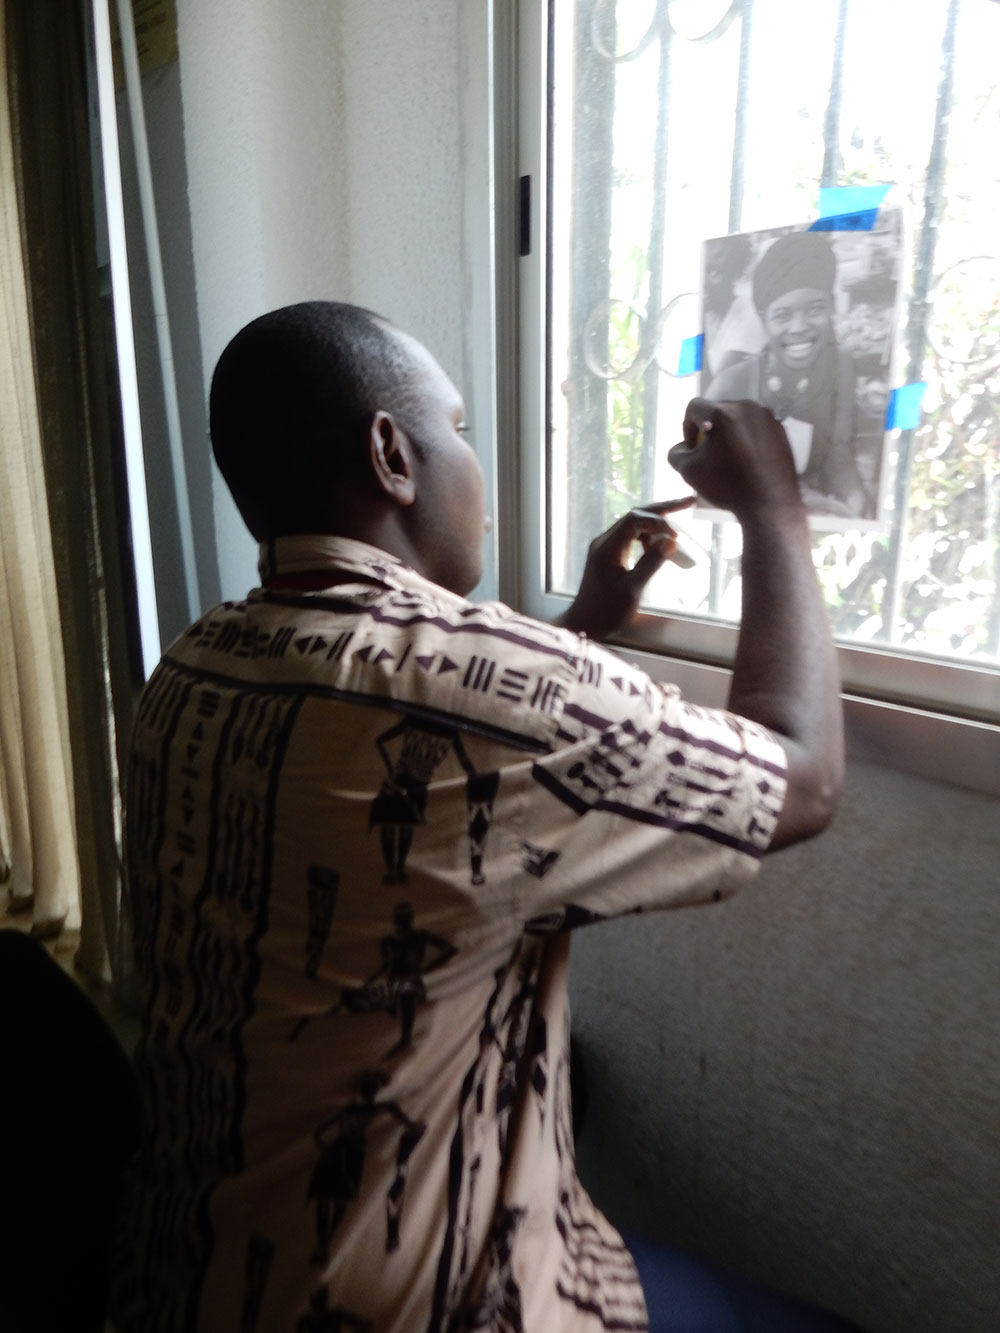 Ibrahima Lansana Kaba of the SMARTE Project of Winrock, International practices tracing in a window.